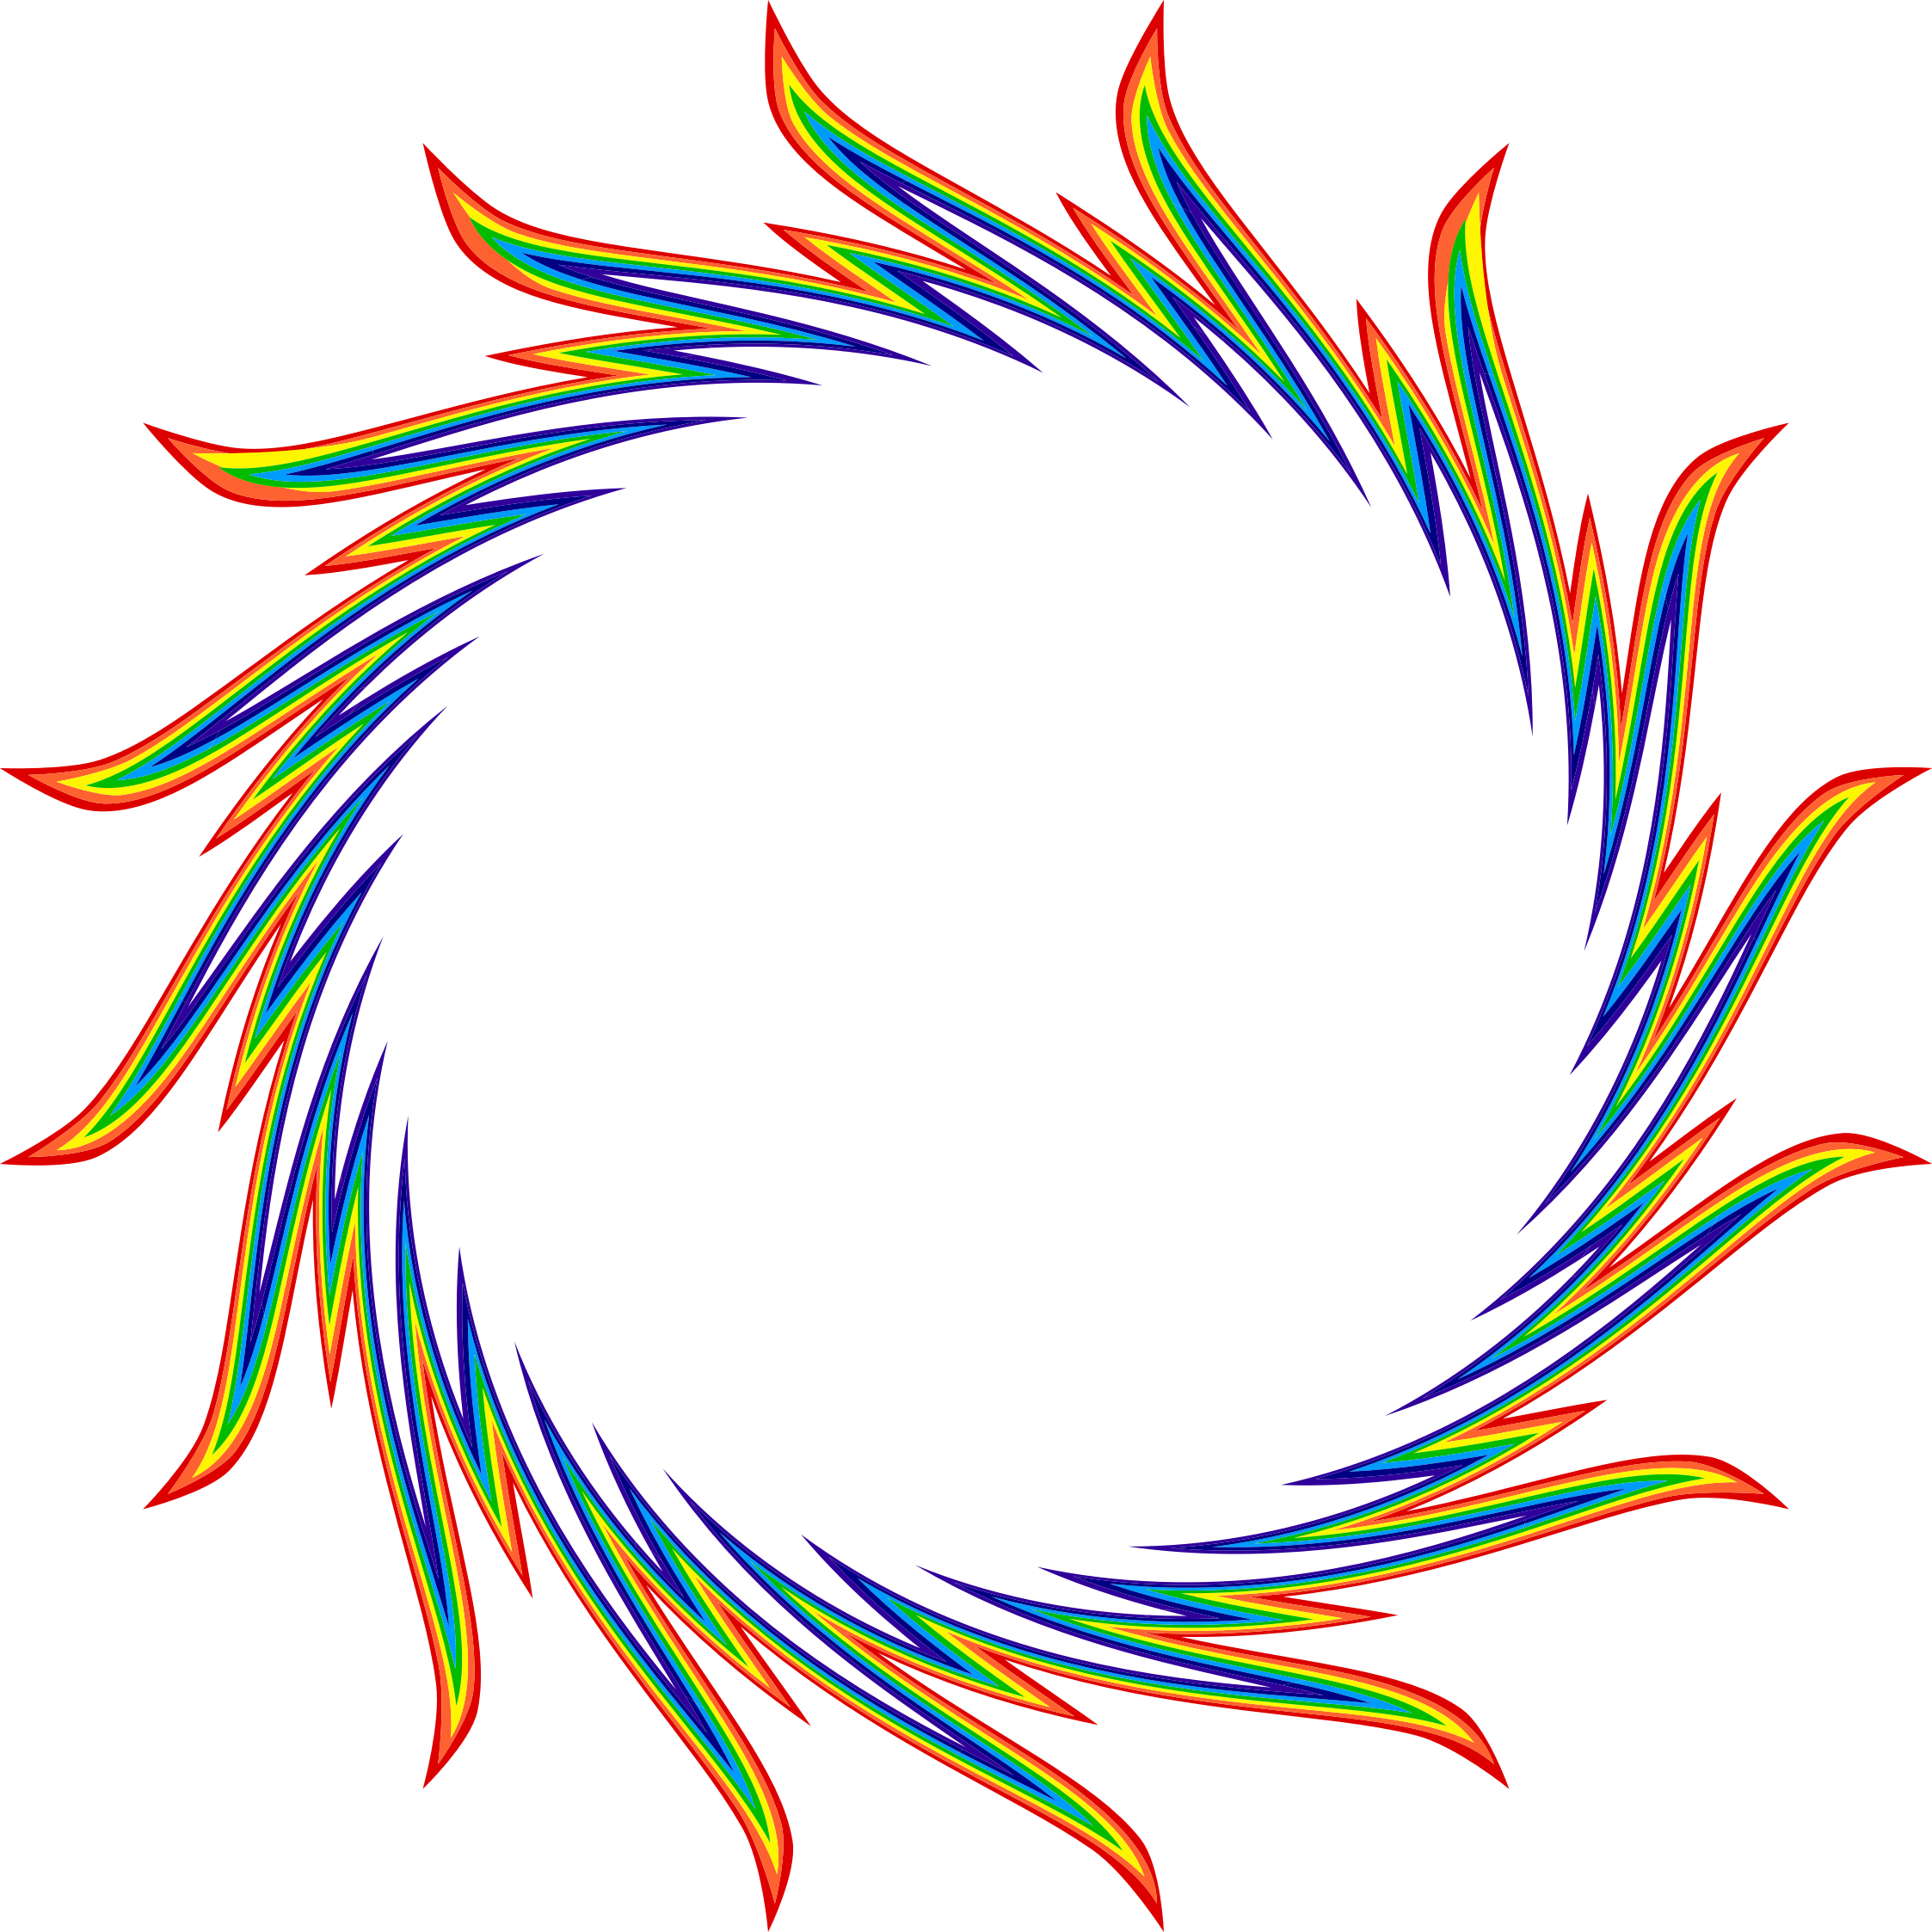 Flame clipart rainbow. Ring of flames big